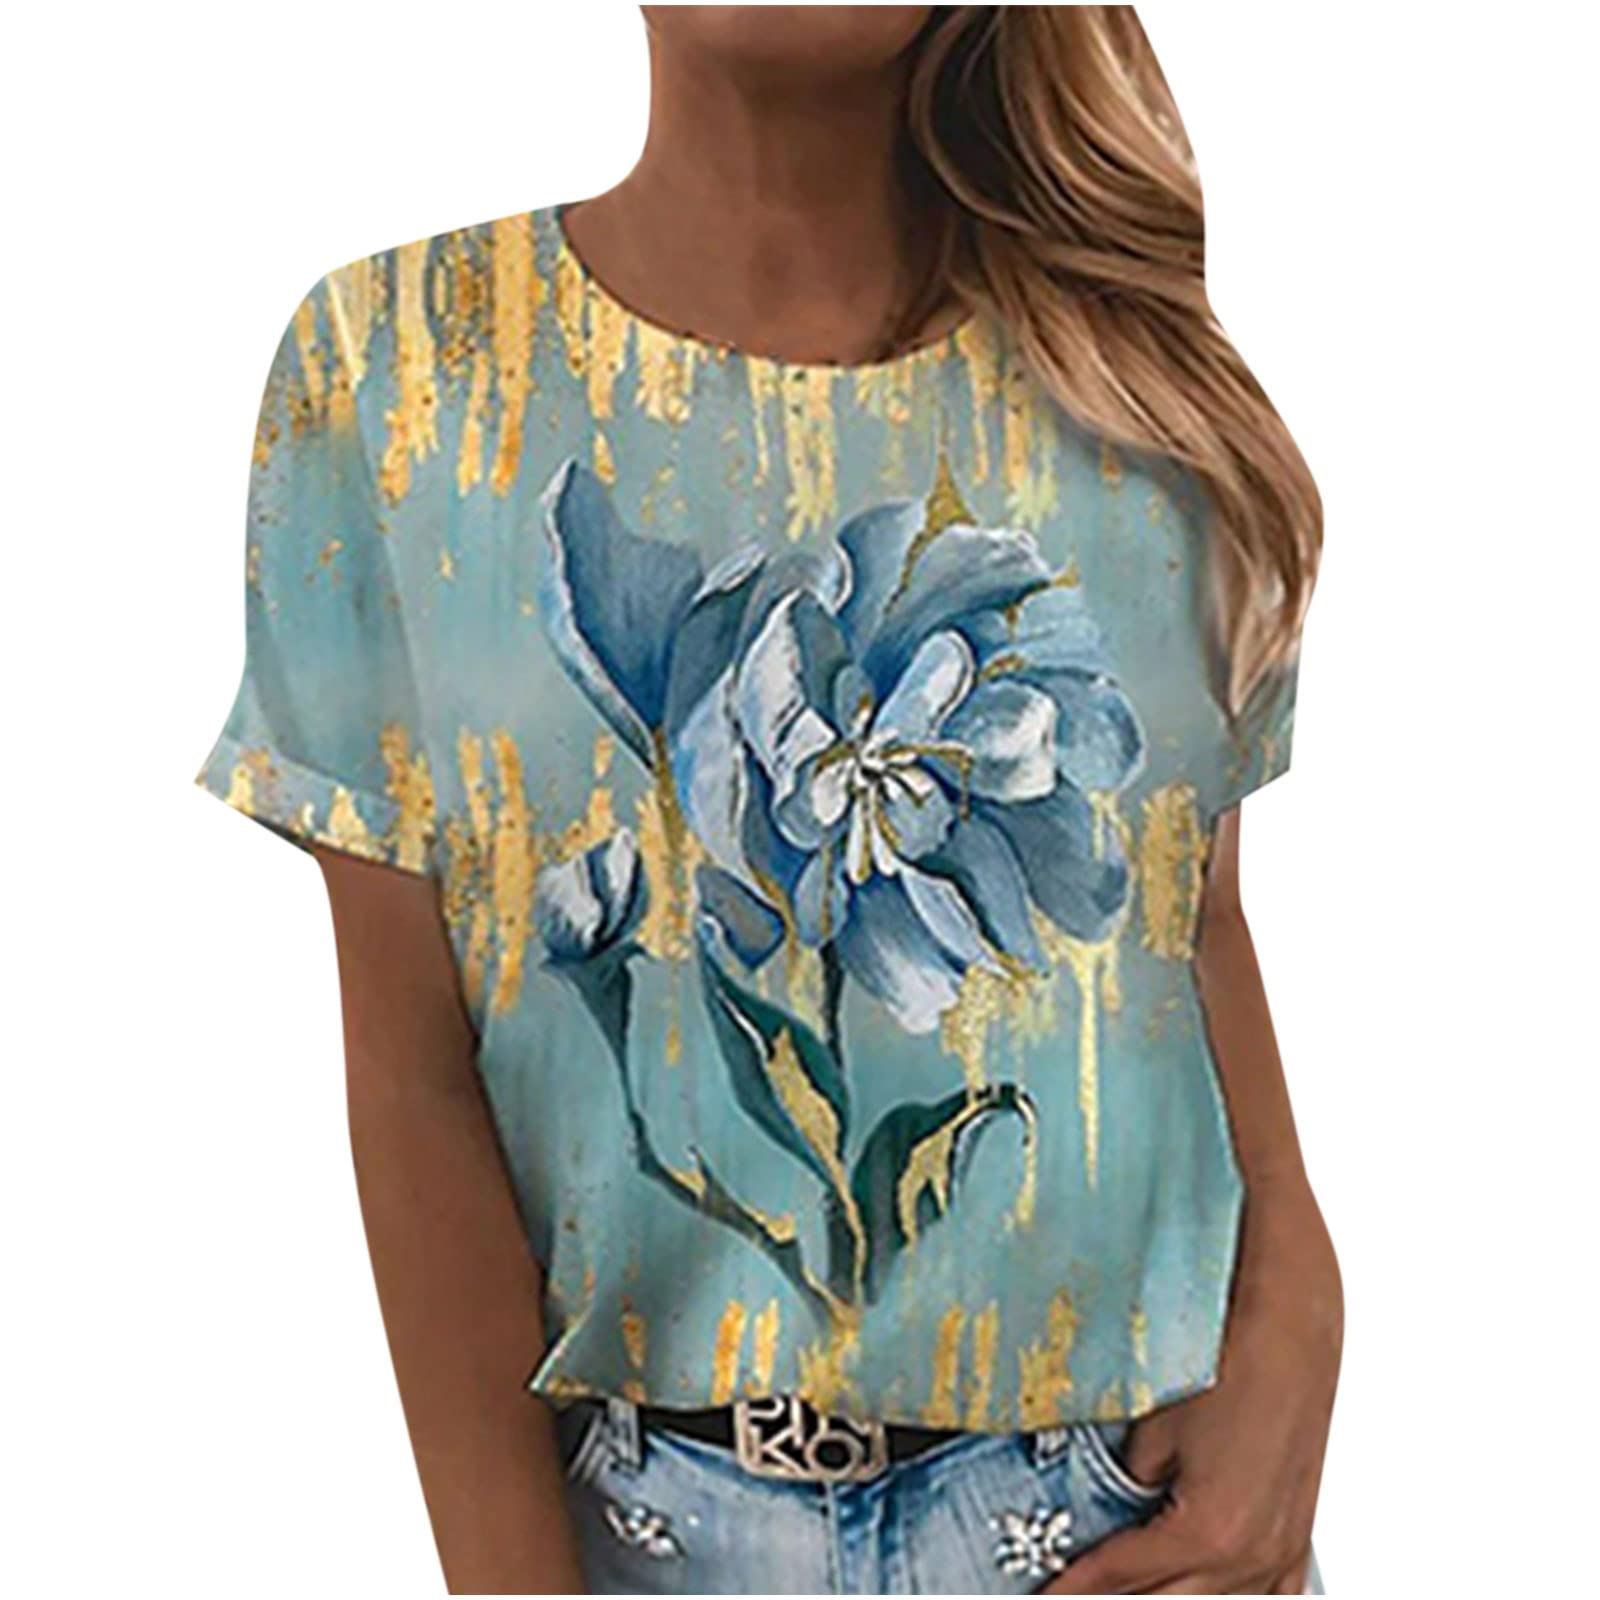 T Shirts for Women Casual Vintage Flowers Printed Blouse Short Sleeve Round Neck  Sweatshirt Tops Graphic Tees XX-Large Green